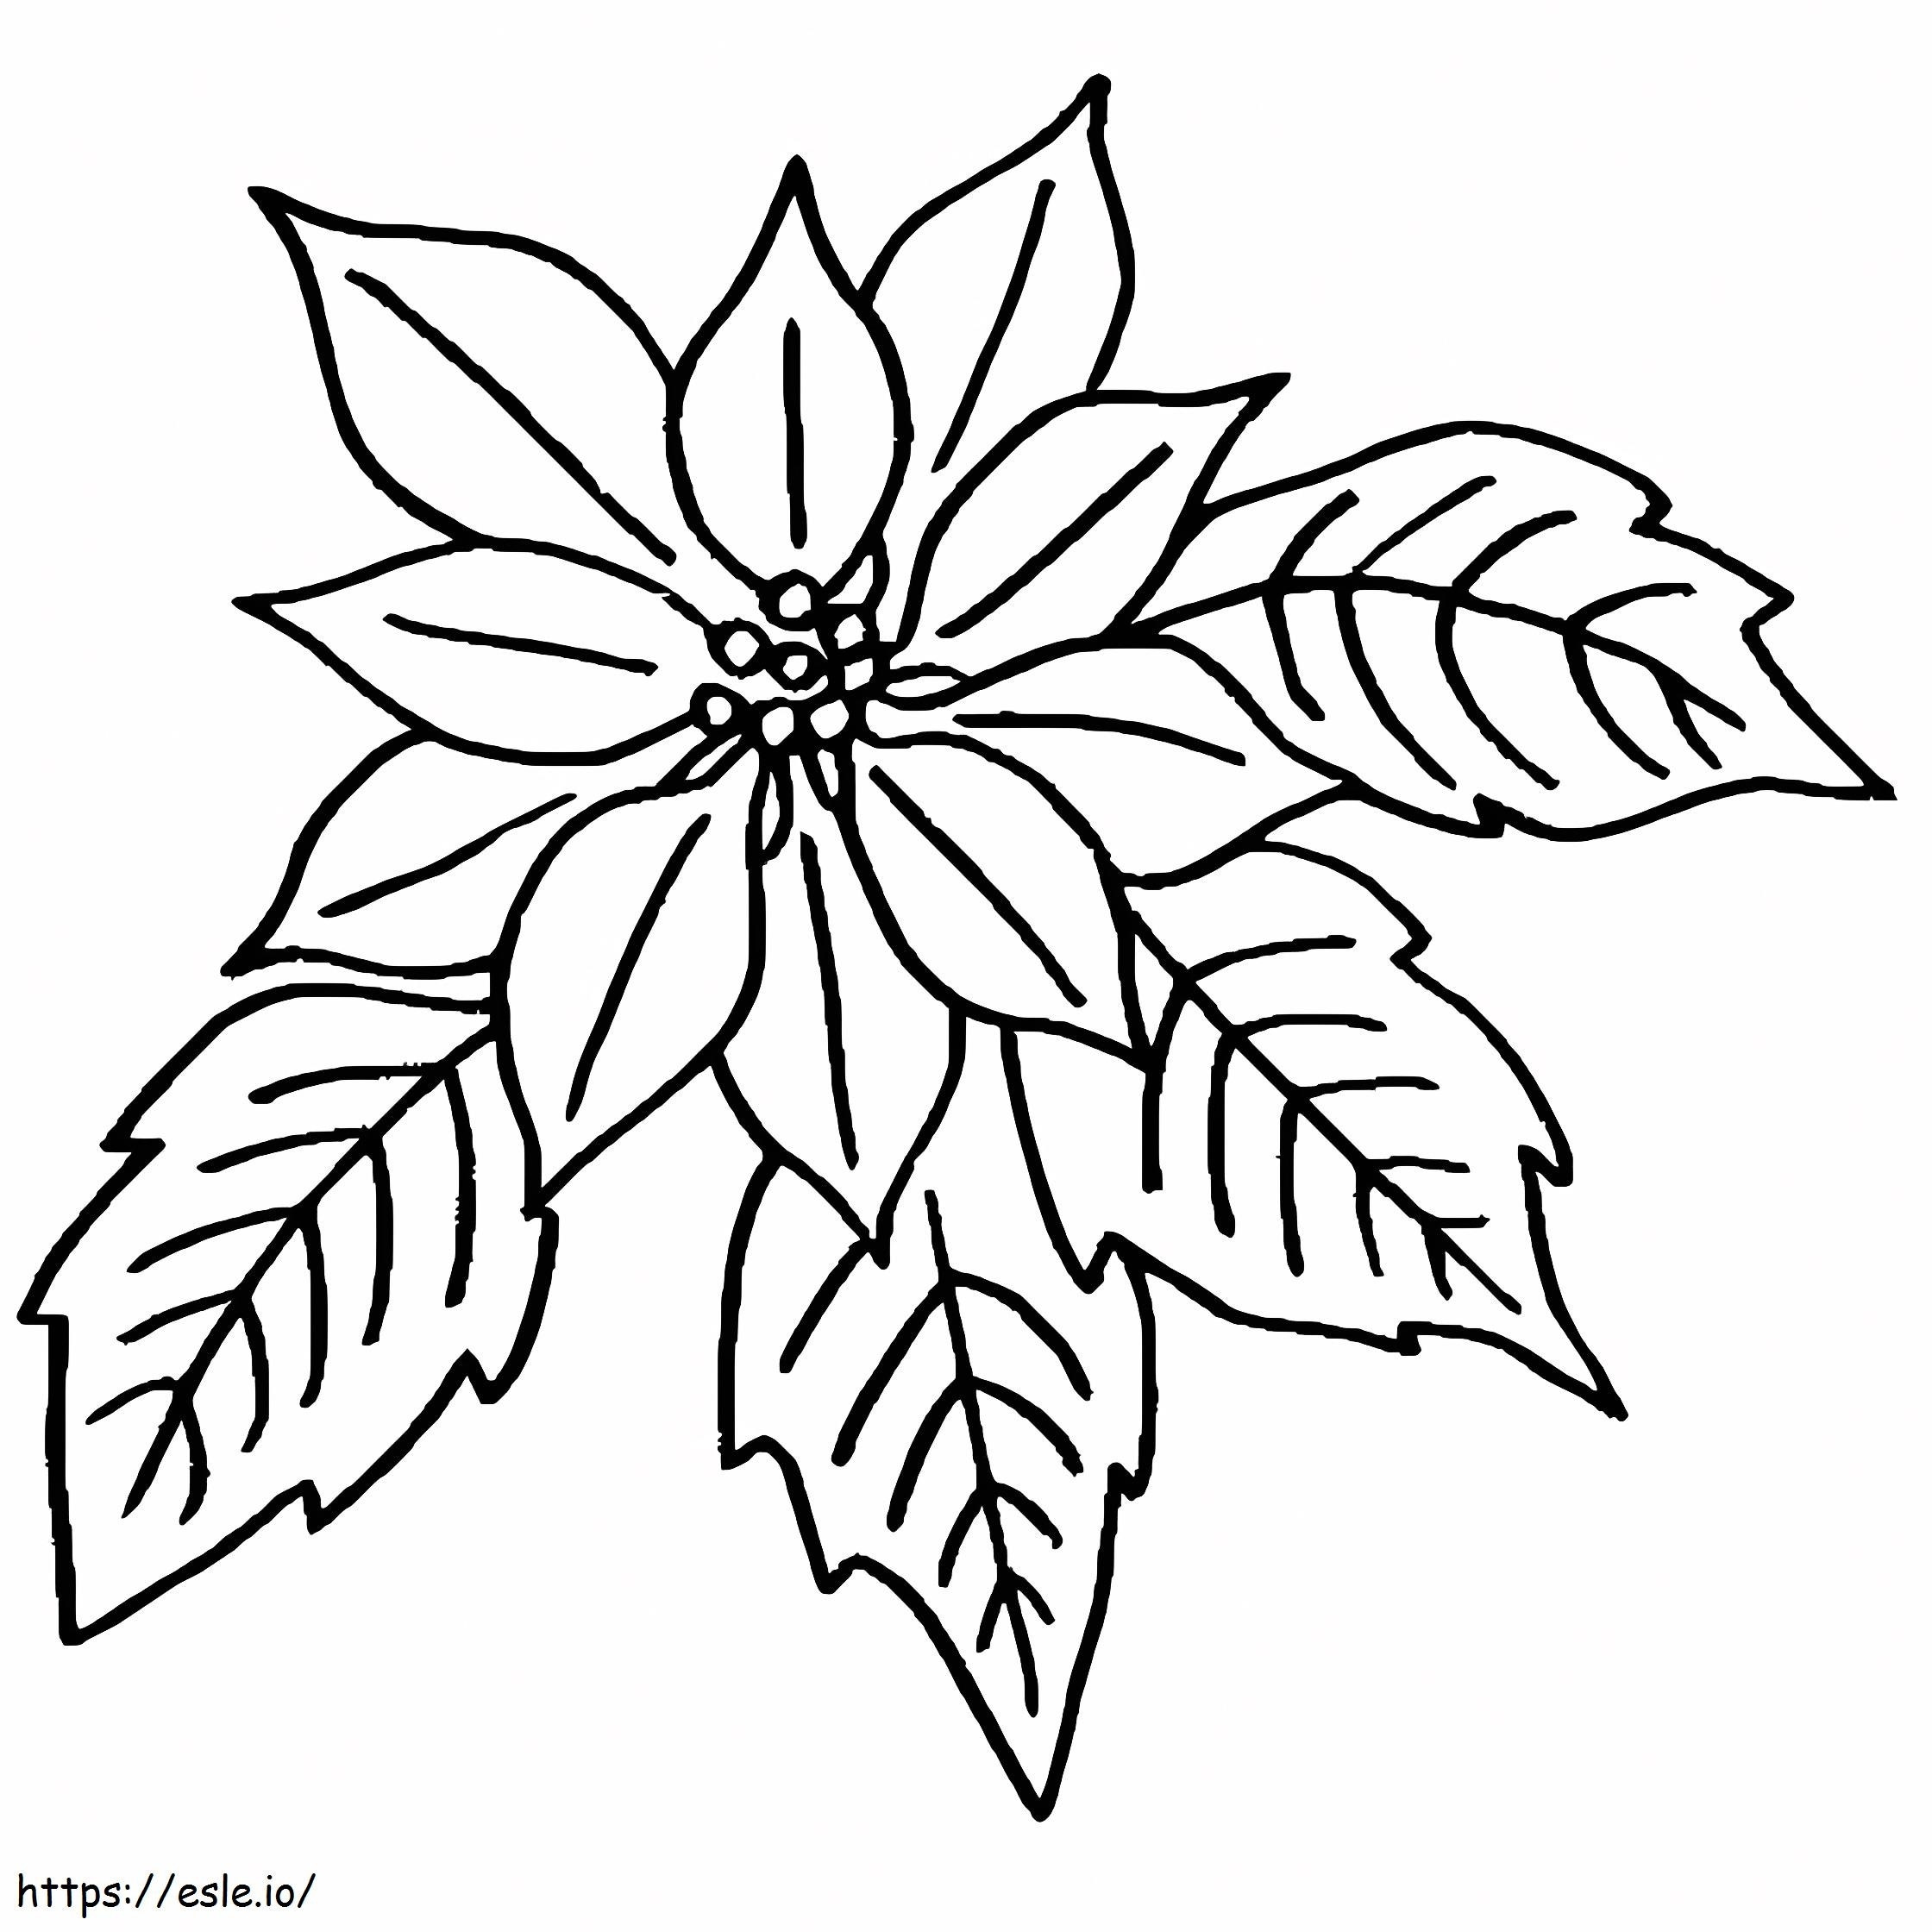 Poinsettia Flower And Leaves coloring page